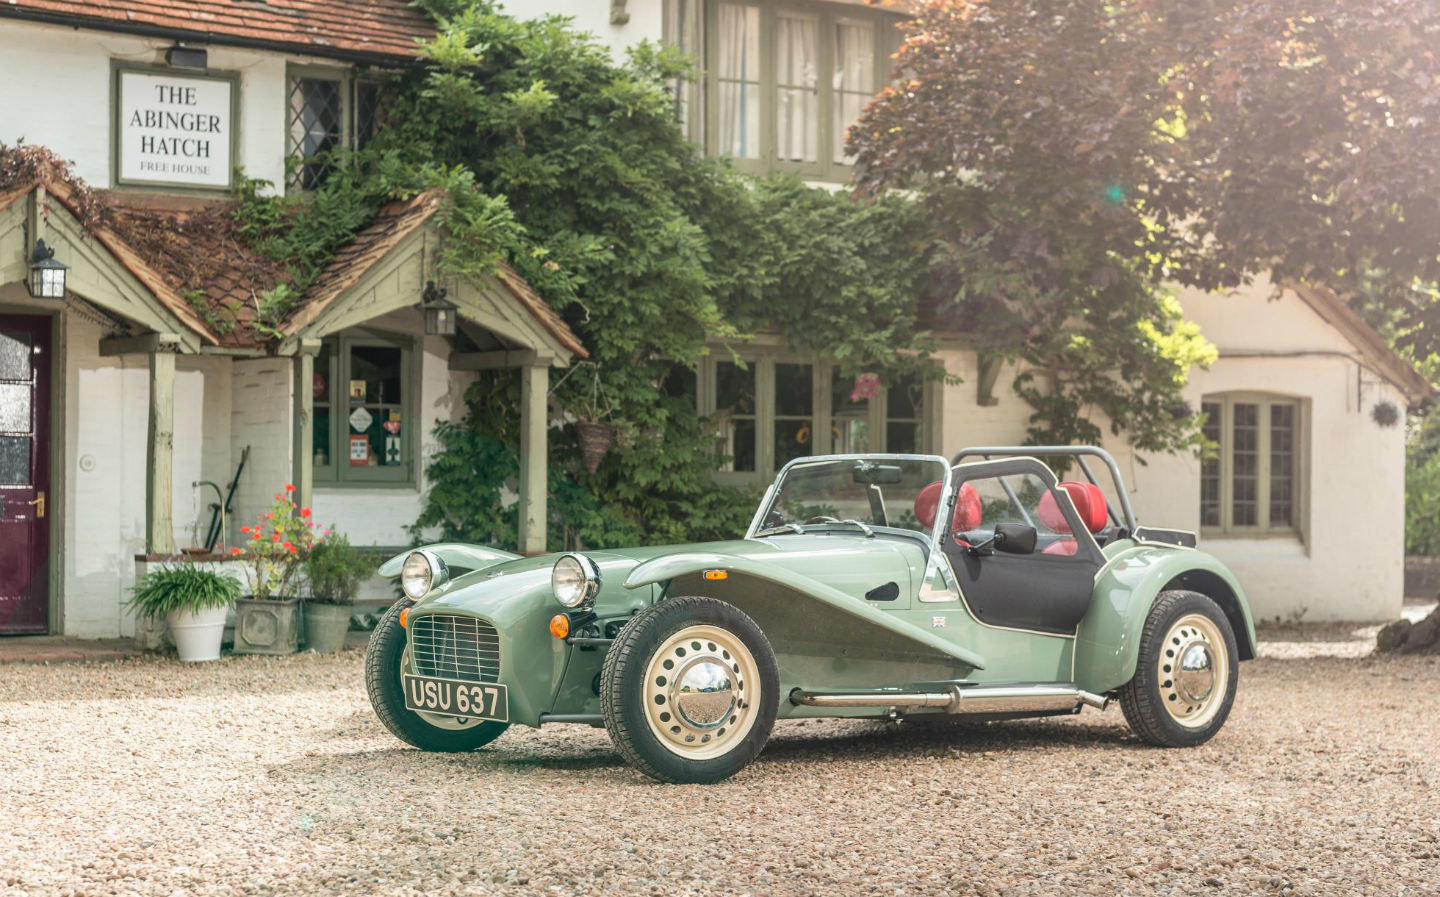 Back to basics in the digital age brings success for Caterham sports cars